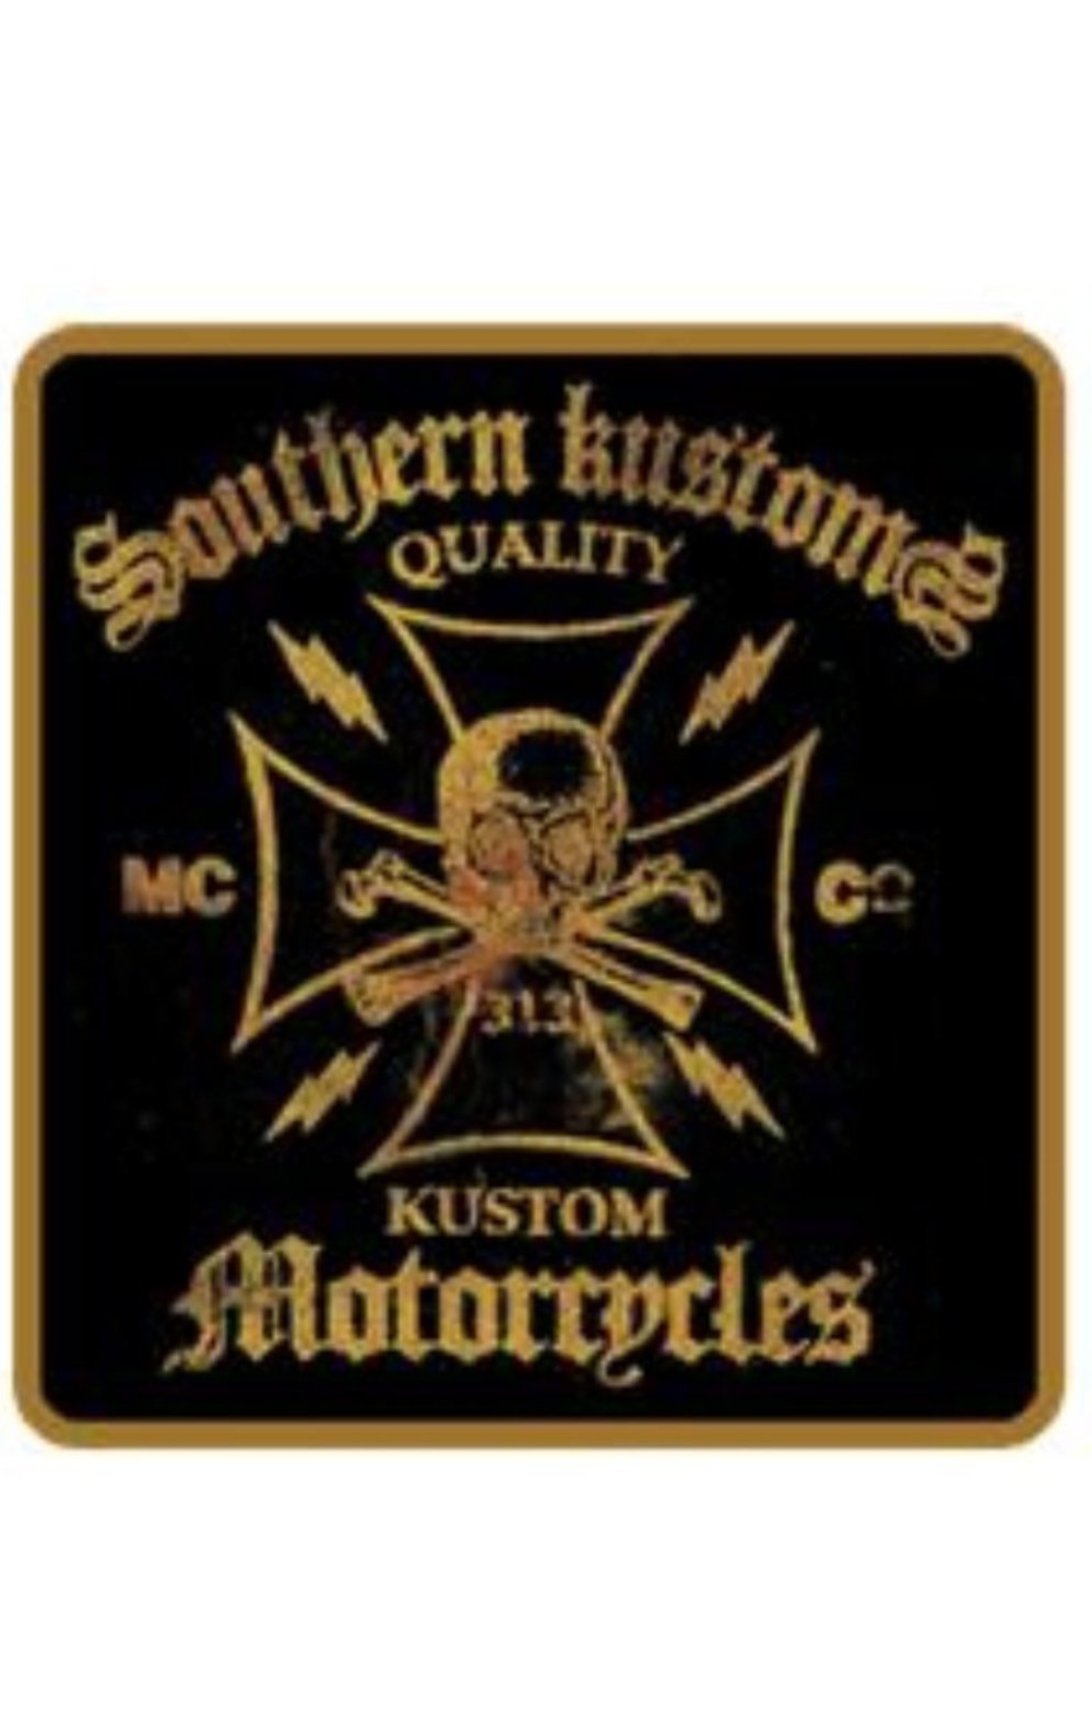 The SOUTHERN KUSTOMS Printed Patch